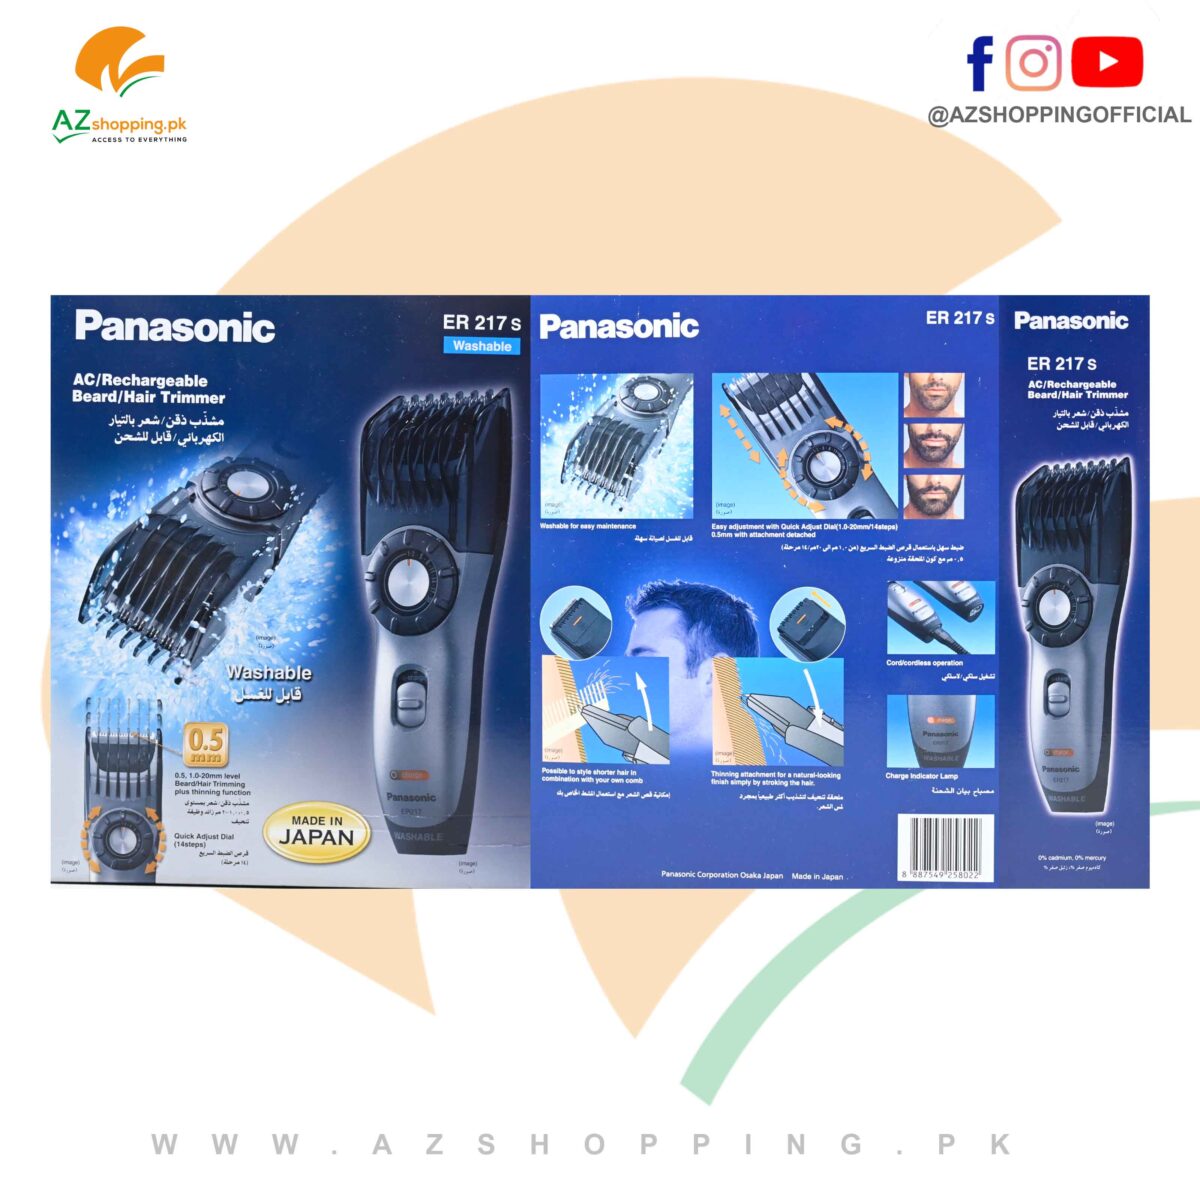 Panasonic – AC/Rechargeable Washable Beard Hair Trimmer, Clipper, Groomer Machine with 0.5mm-20mm Cutting Length Adjustment - Model: ER217s